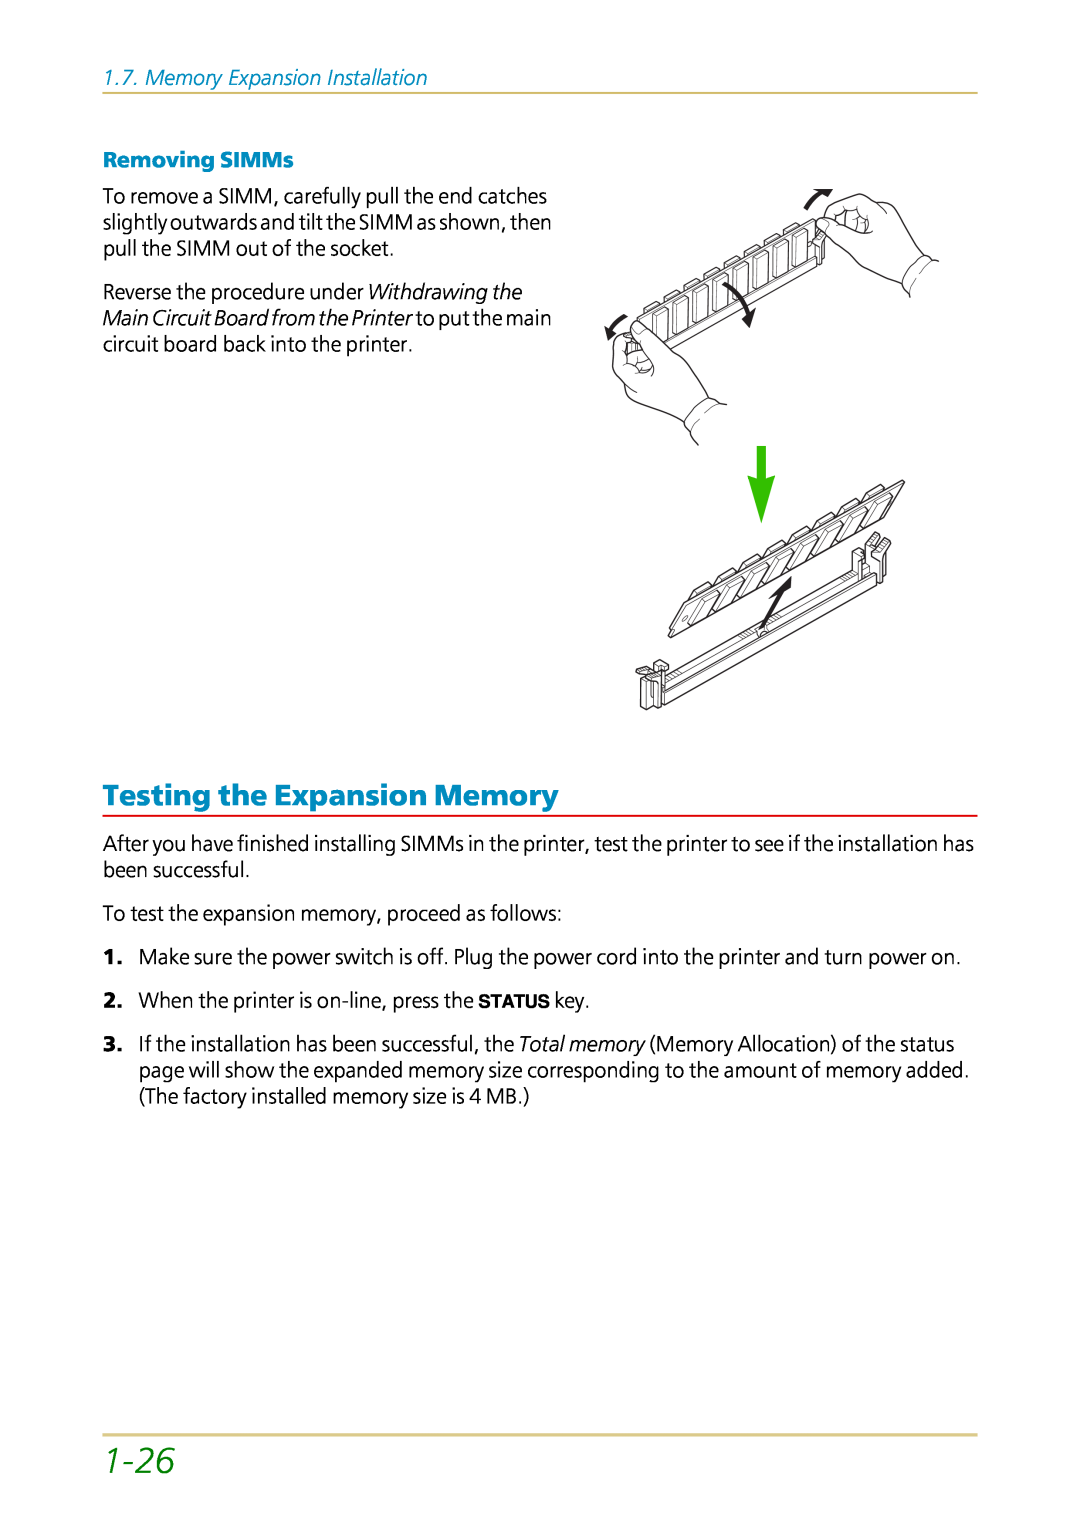 Kyocera FS-1700 user manual 1-26, Testing the Expansion Memory, Memory Expansion Installation, Removing SIMMs 